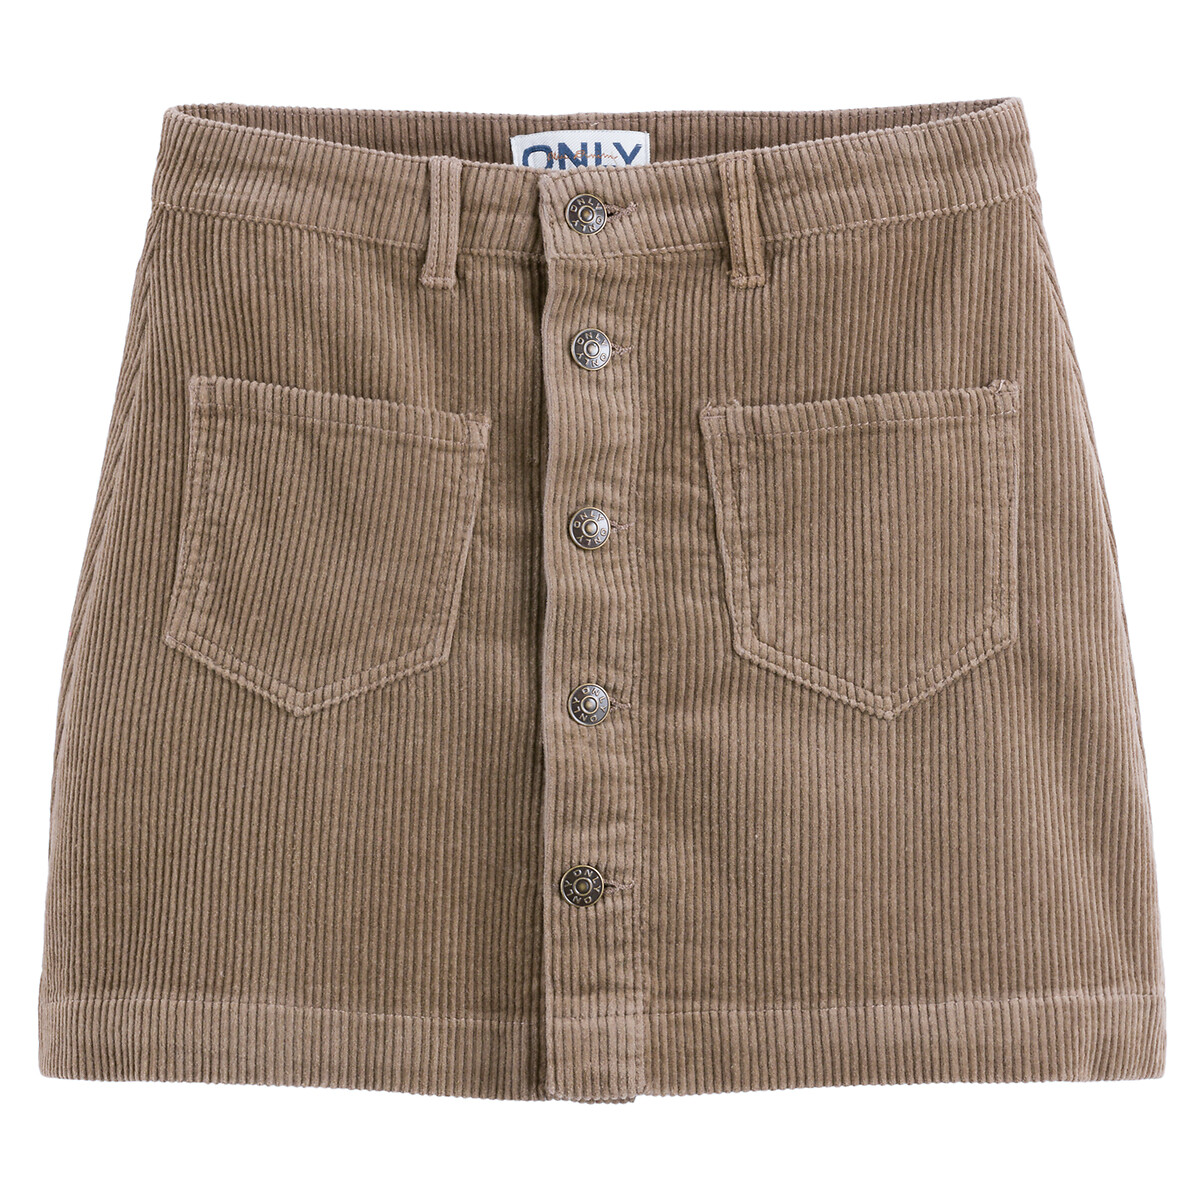 Image of Corduroy Buttoned Mini Skirt